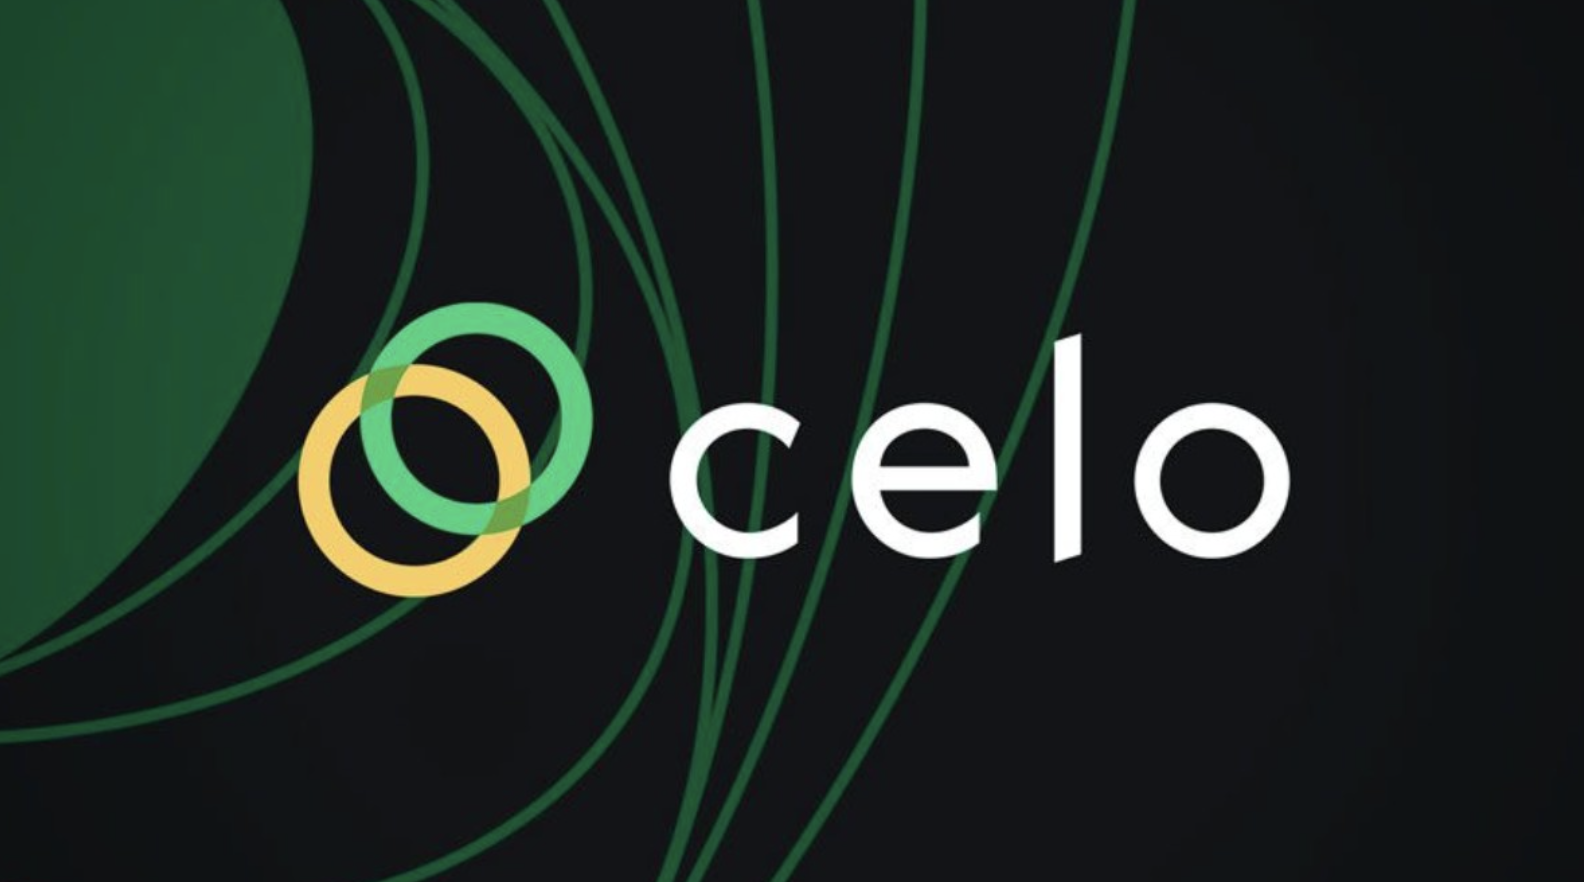 What is Celo Coin?